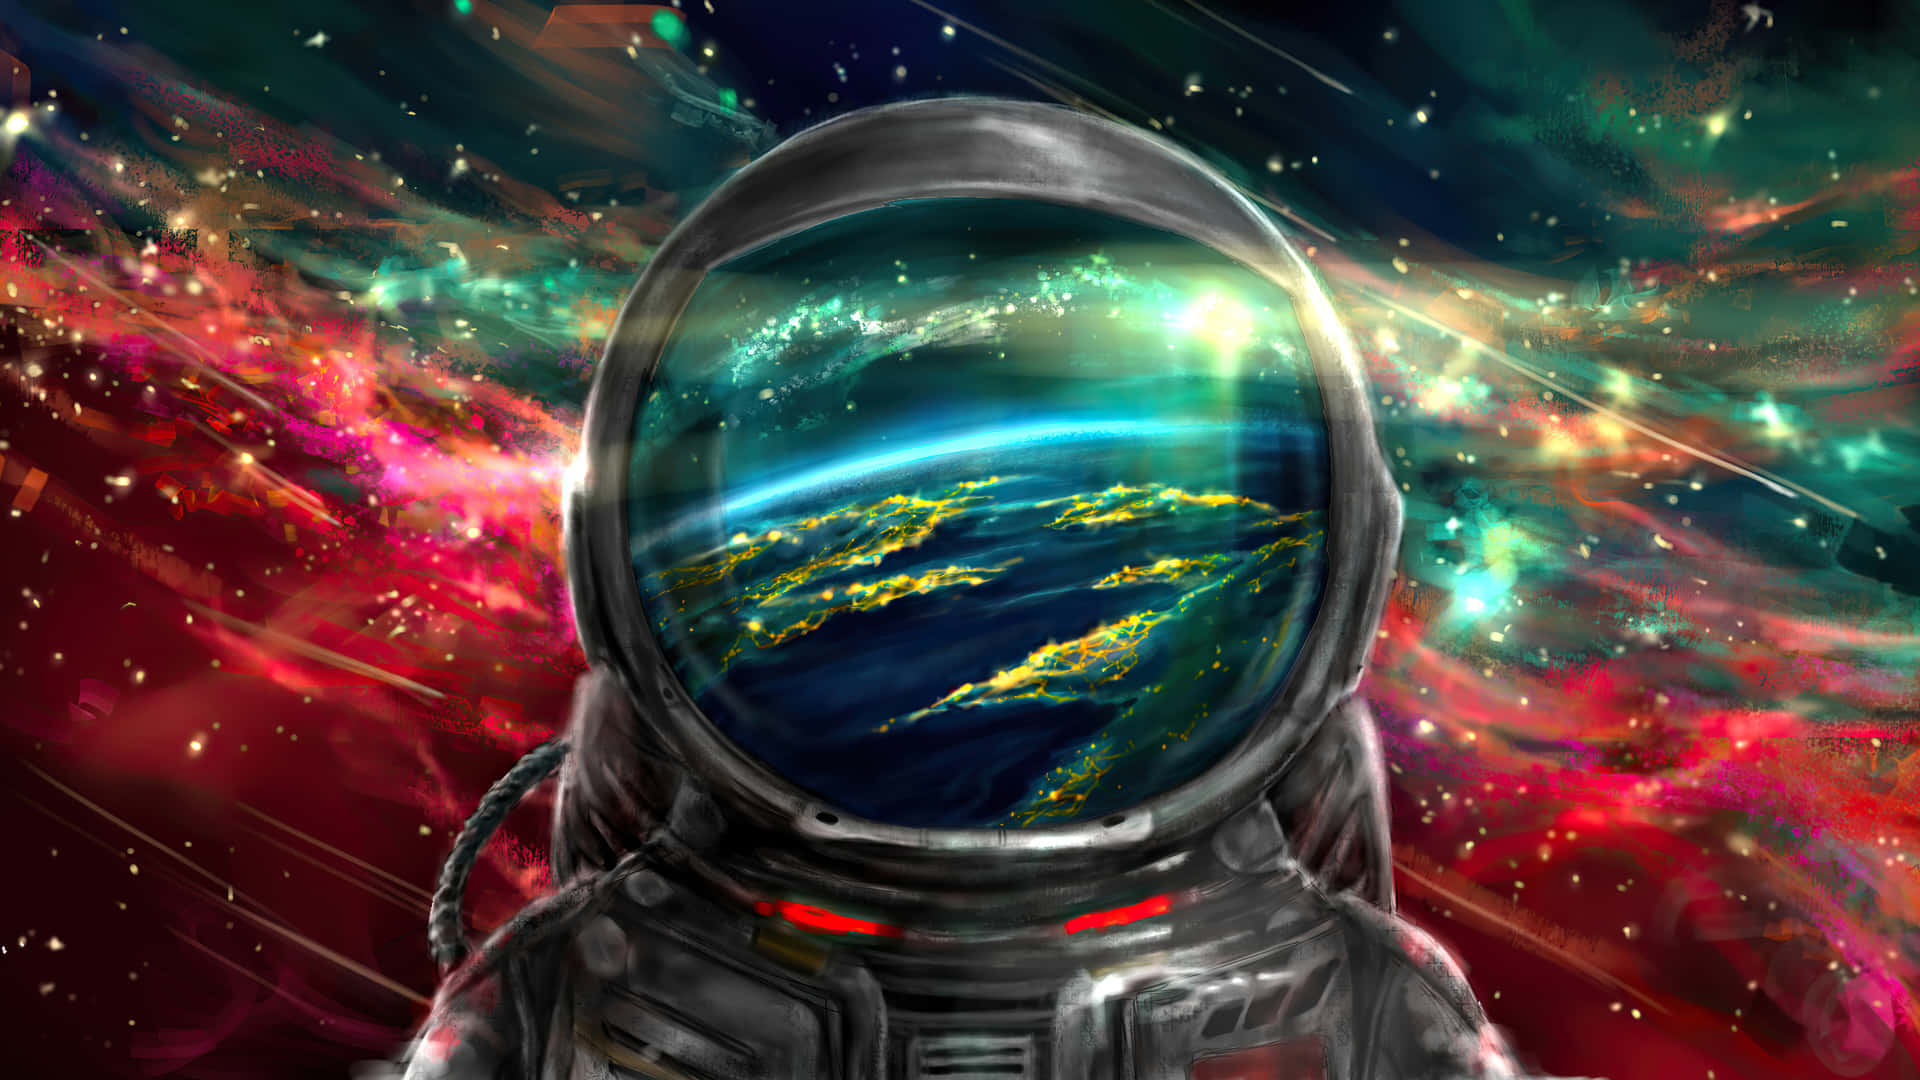 Explore the depths of space in mesmerizing 3D Wallpaper